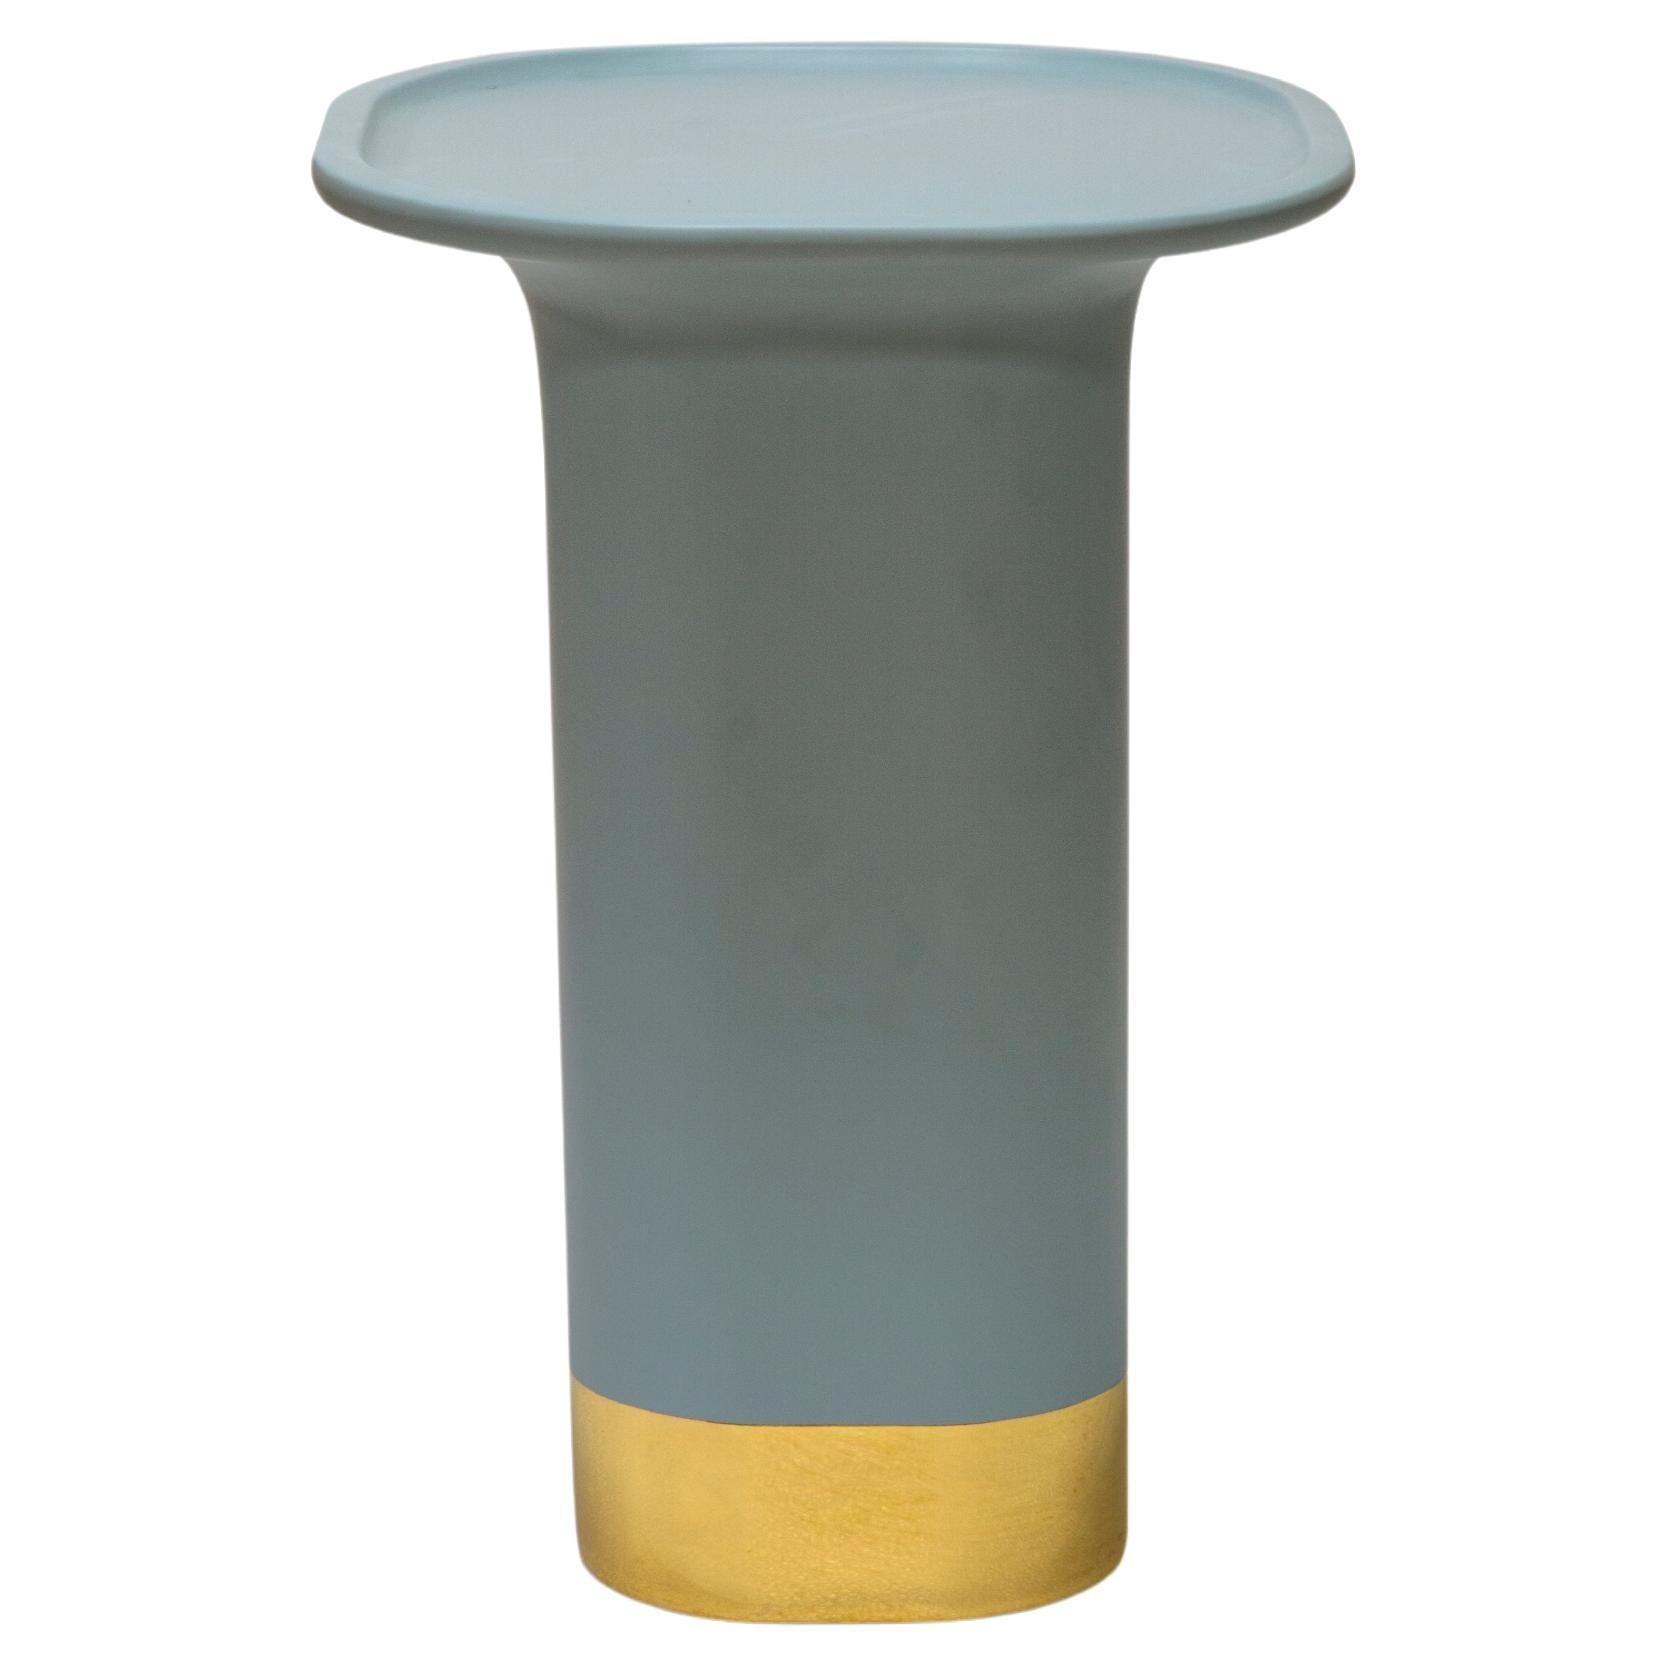 Sune L, Colorama collection
Design by Matteo Zorzenoni, product by Scapin Collezioni

Made of ceramic, the Sune side tables collection combines modern lines with particular gold or copper finishes. Sune can be personalized with or without a